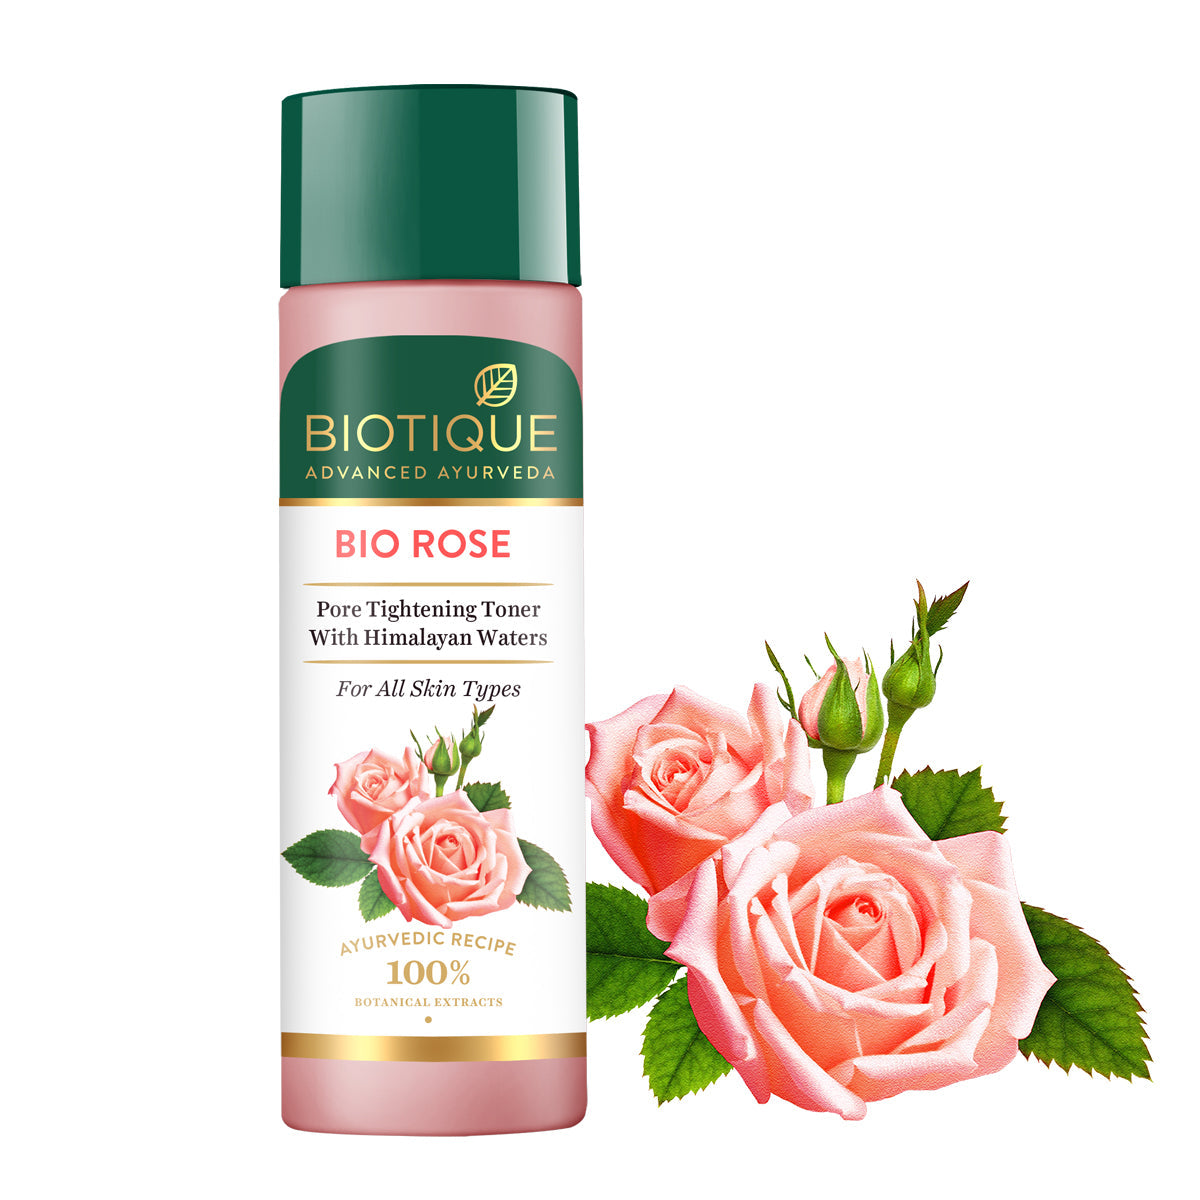 ROSE Pore Tightening Toner With Himalayan Waters120Ml